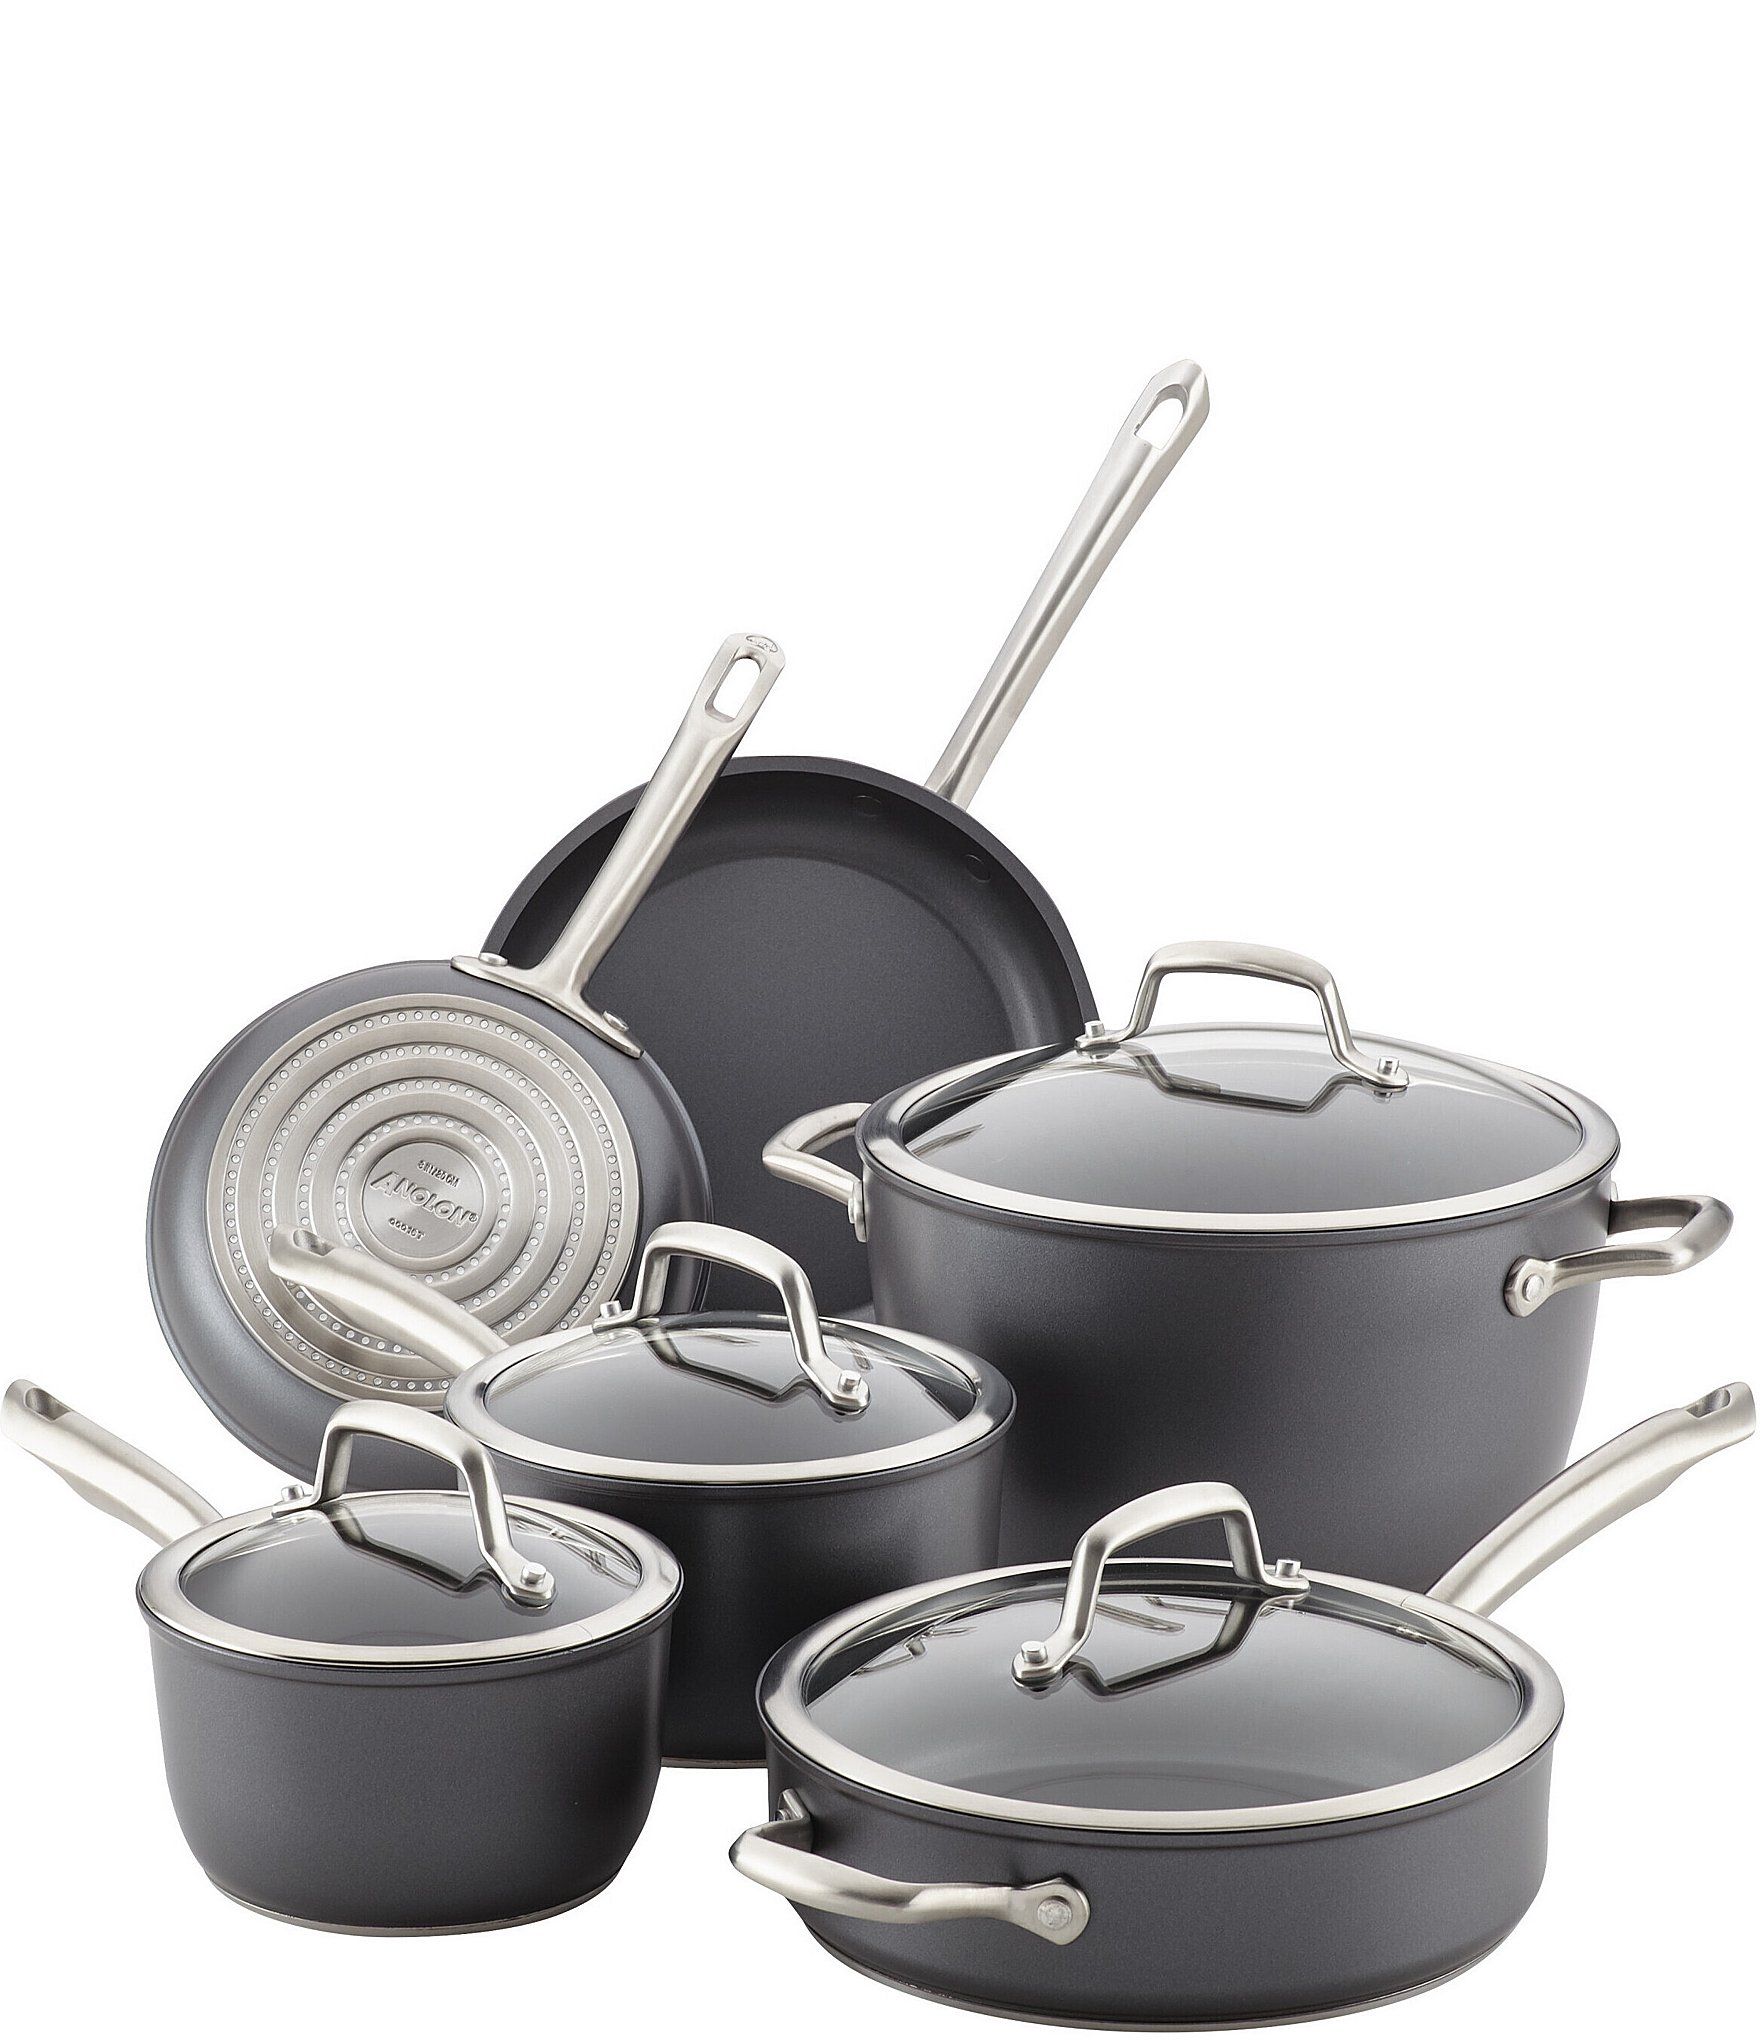 Circulon 10-piece Cookware Set with lifetime warranty at $87.50